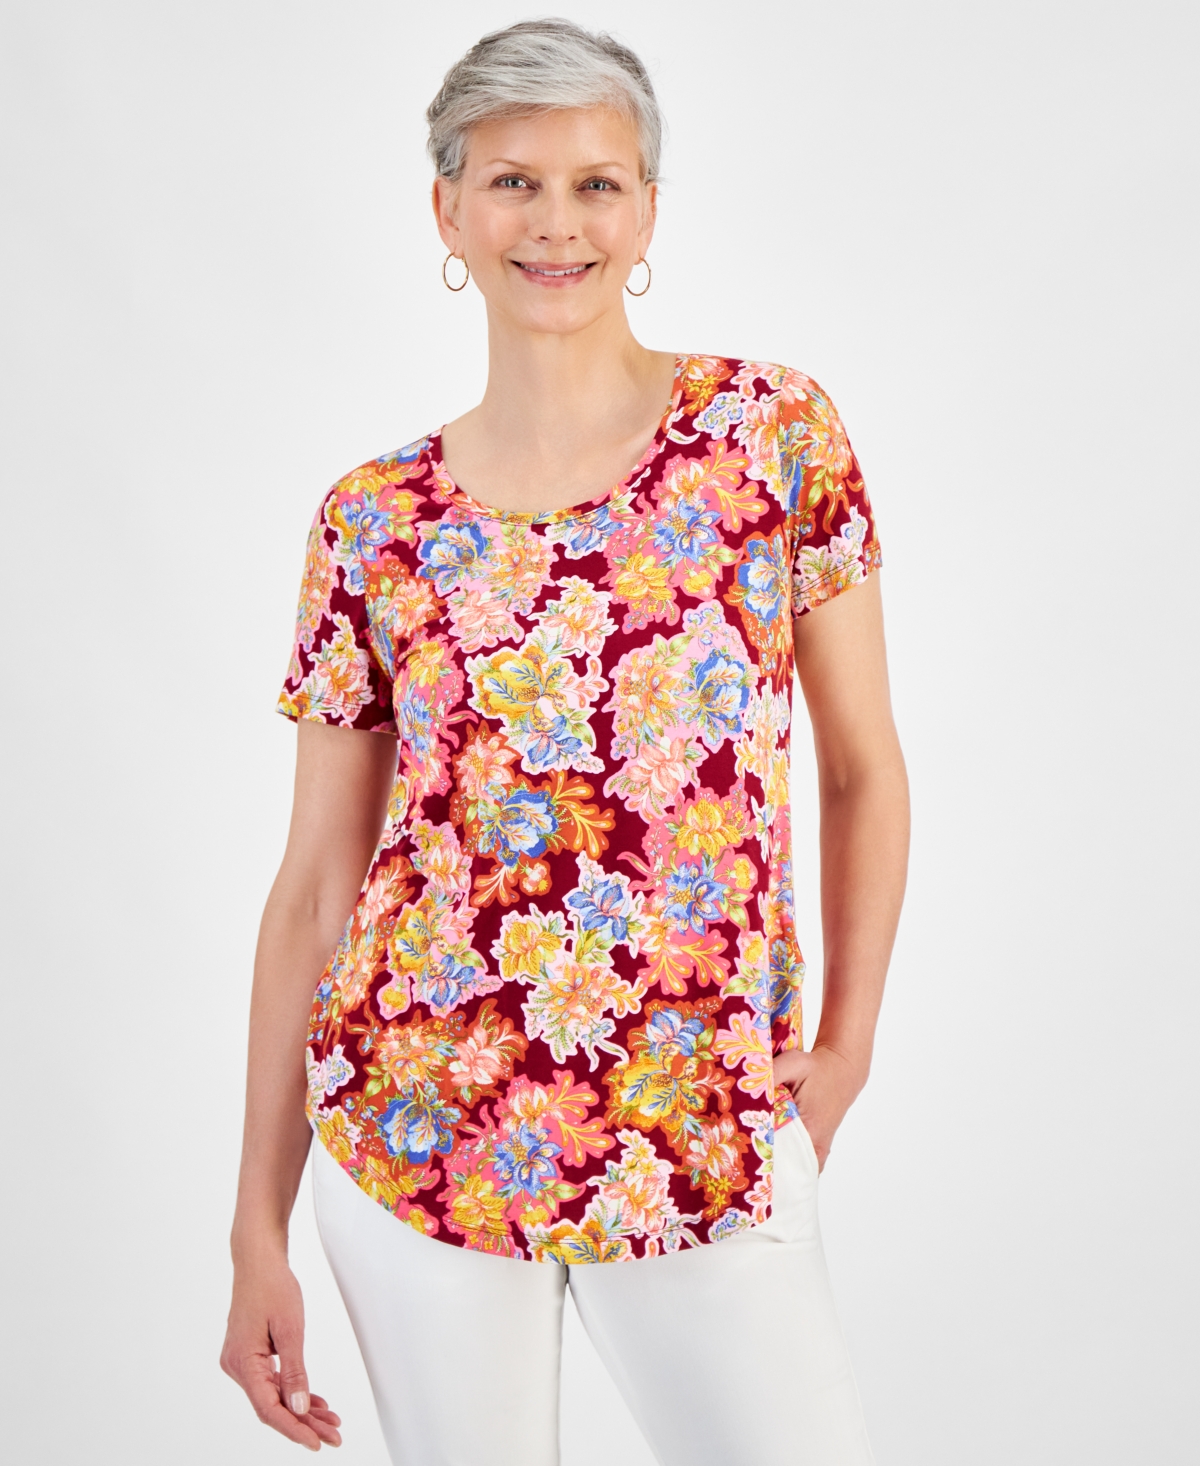 Petite Glorious Garden Scoop-Neck Top, Created for Macy's - Ruby Slippers Combo